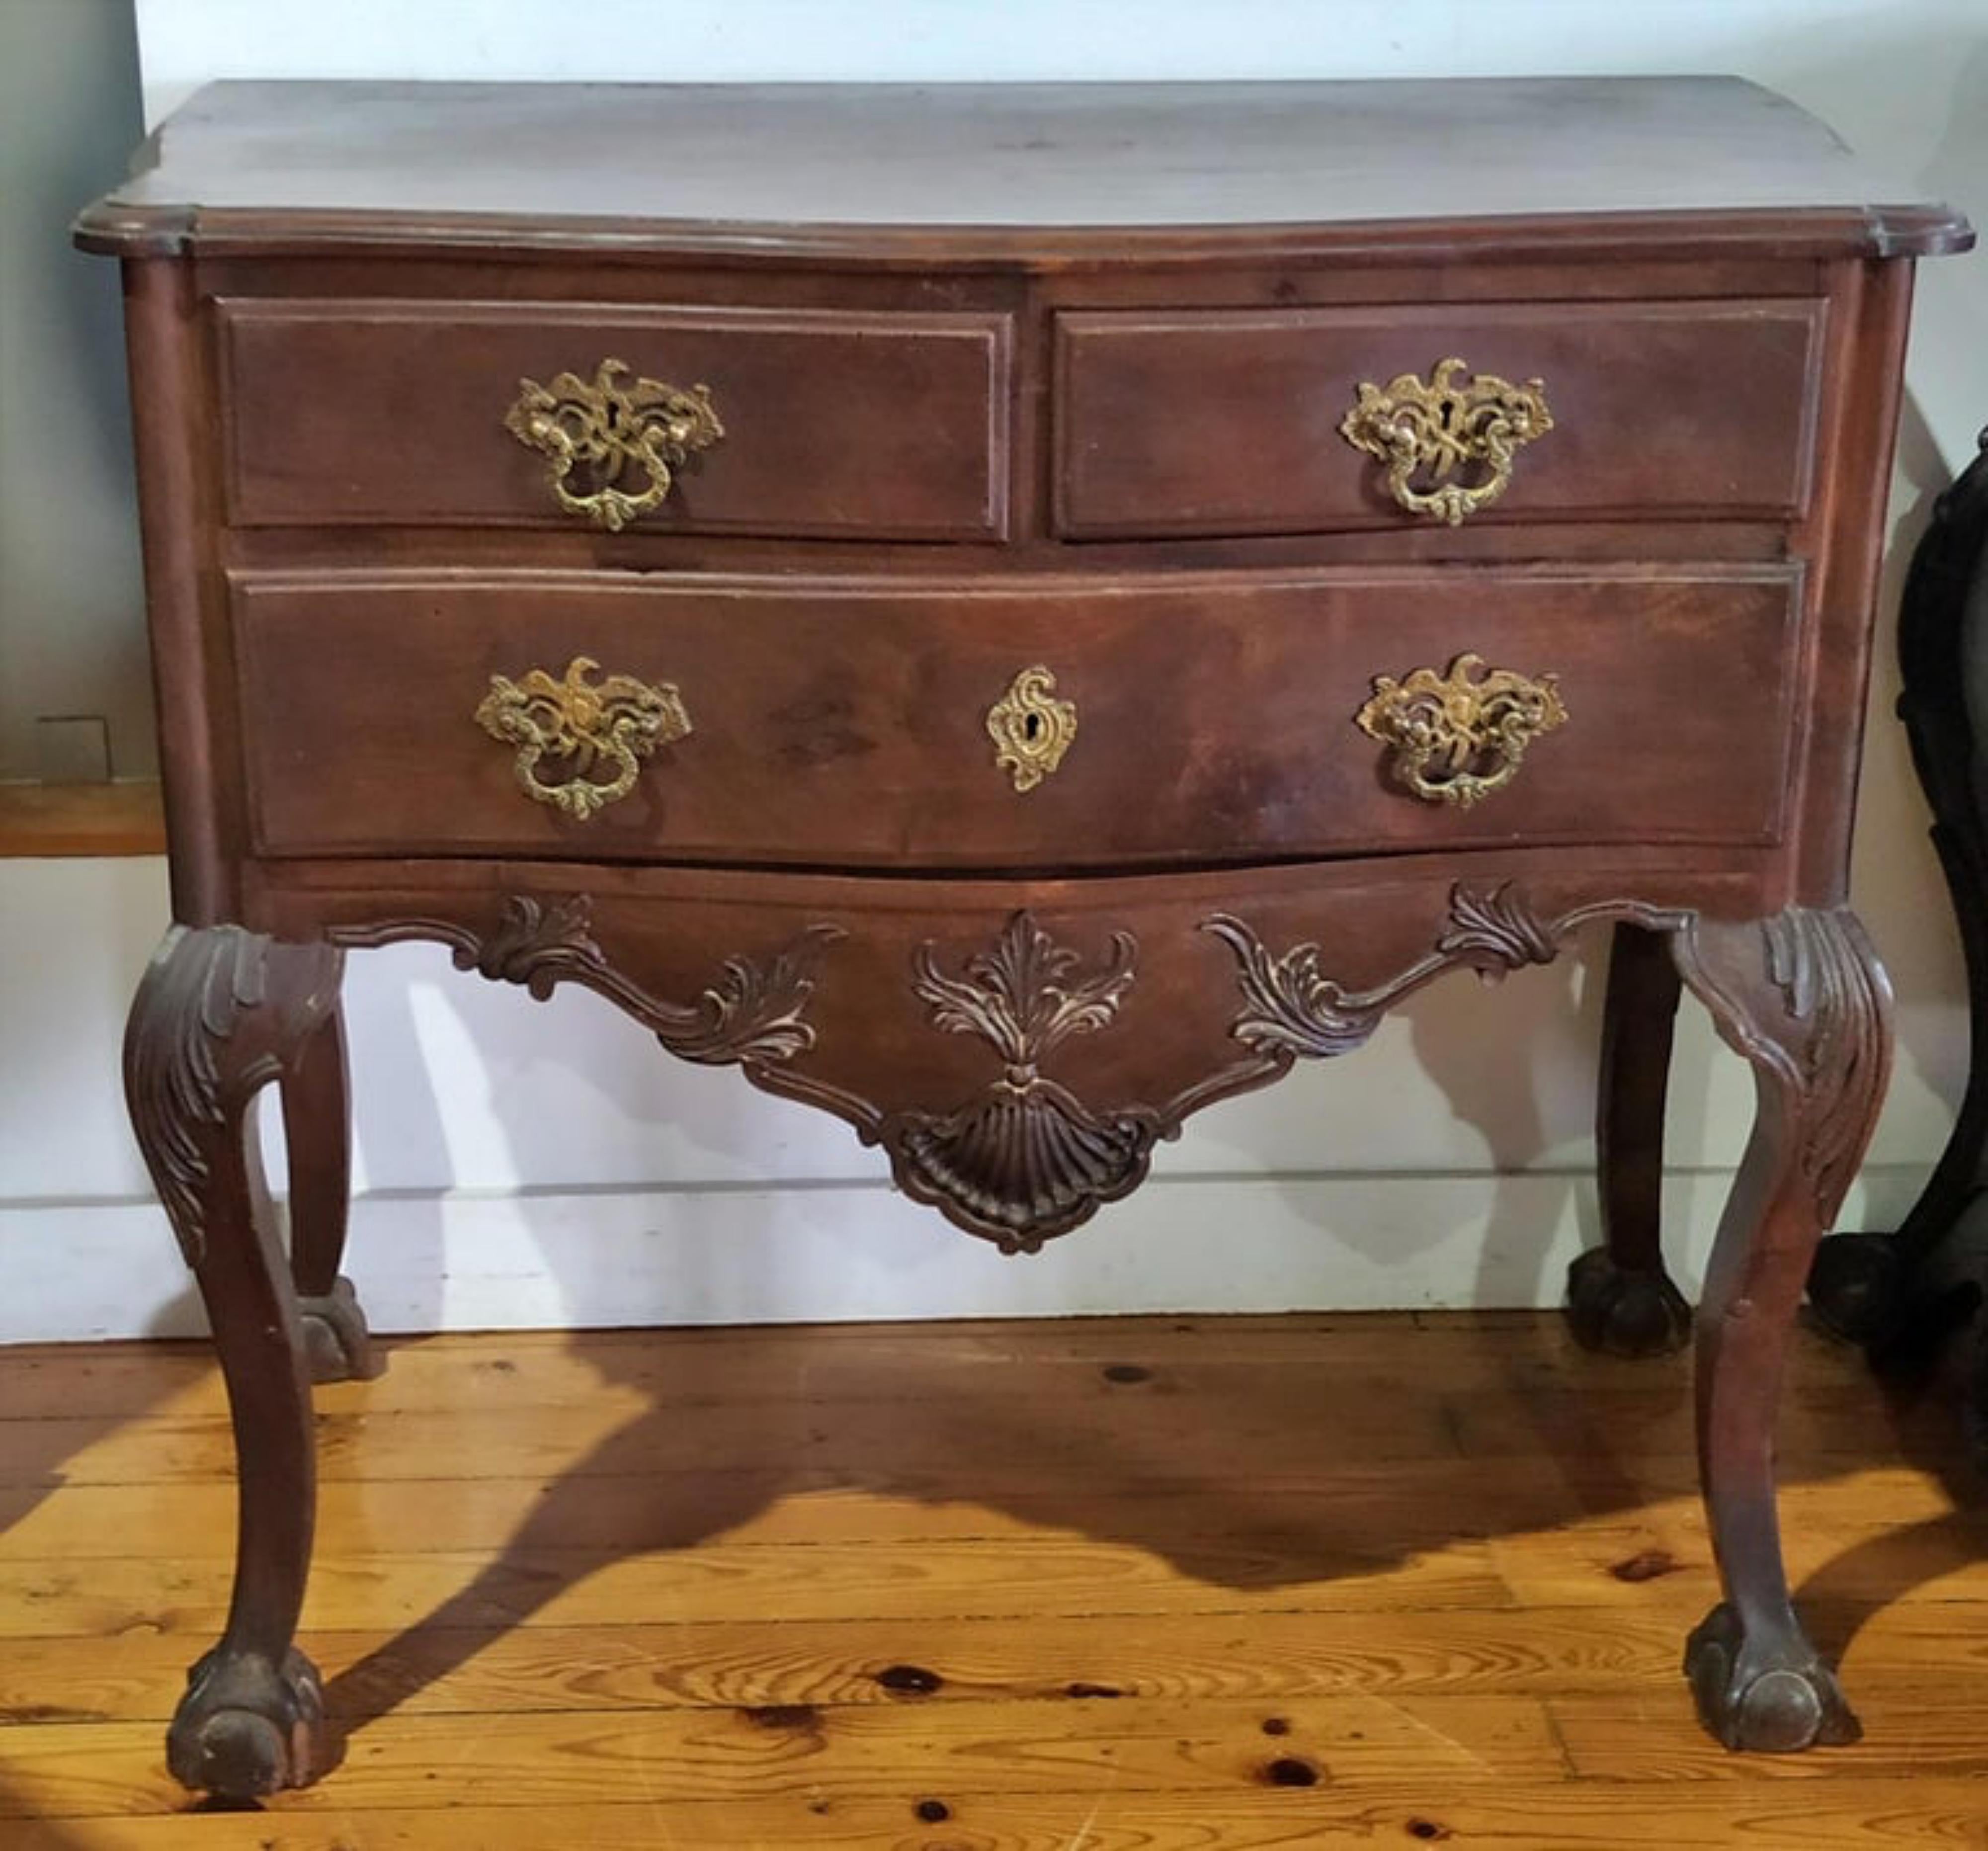 Release table
Portuguese early 20th century
in carved chestnut wood, with two drawers and a pull-out drawer.
Cutout top and skirt.
Sits on four feet ending in claw and ball.
Metal ferrules.
Dimensions.: 86 x 94 x 53 cm.
Good conditions.